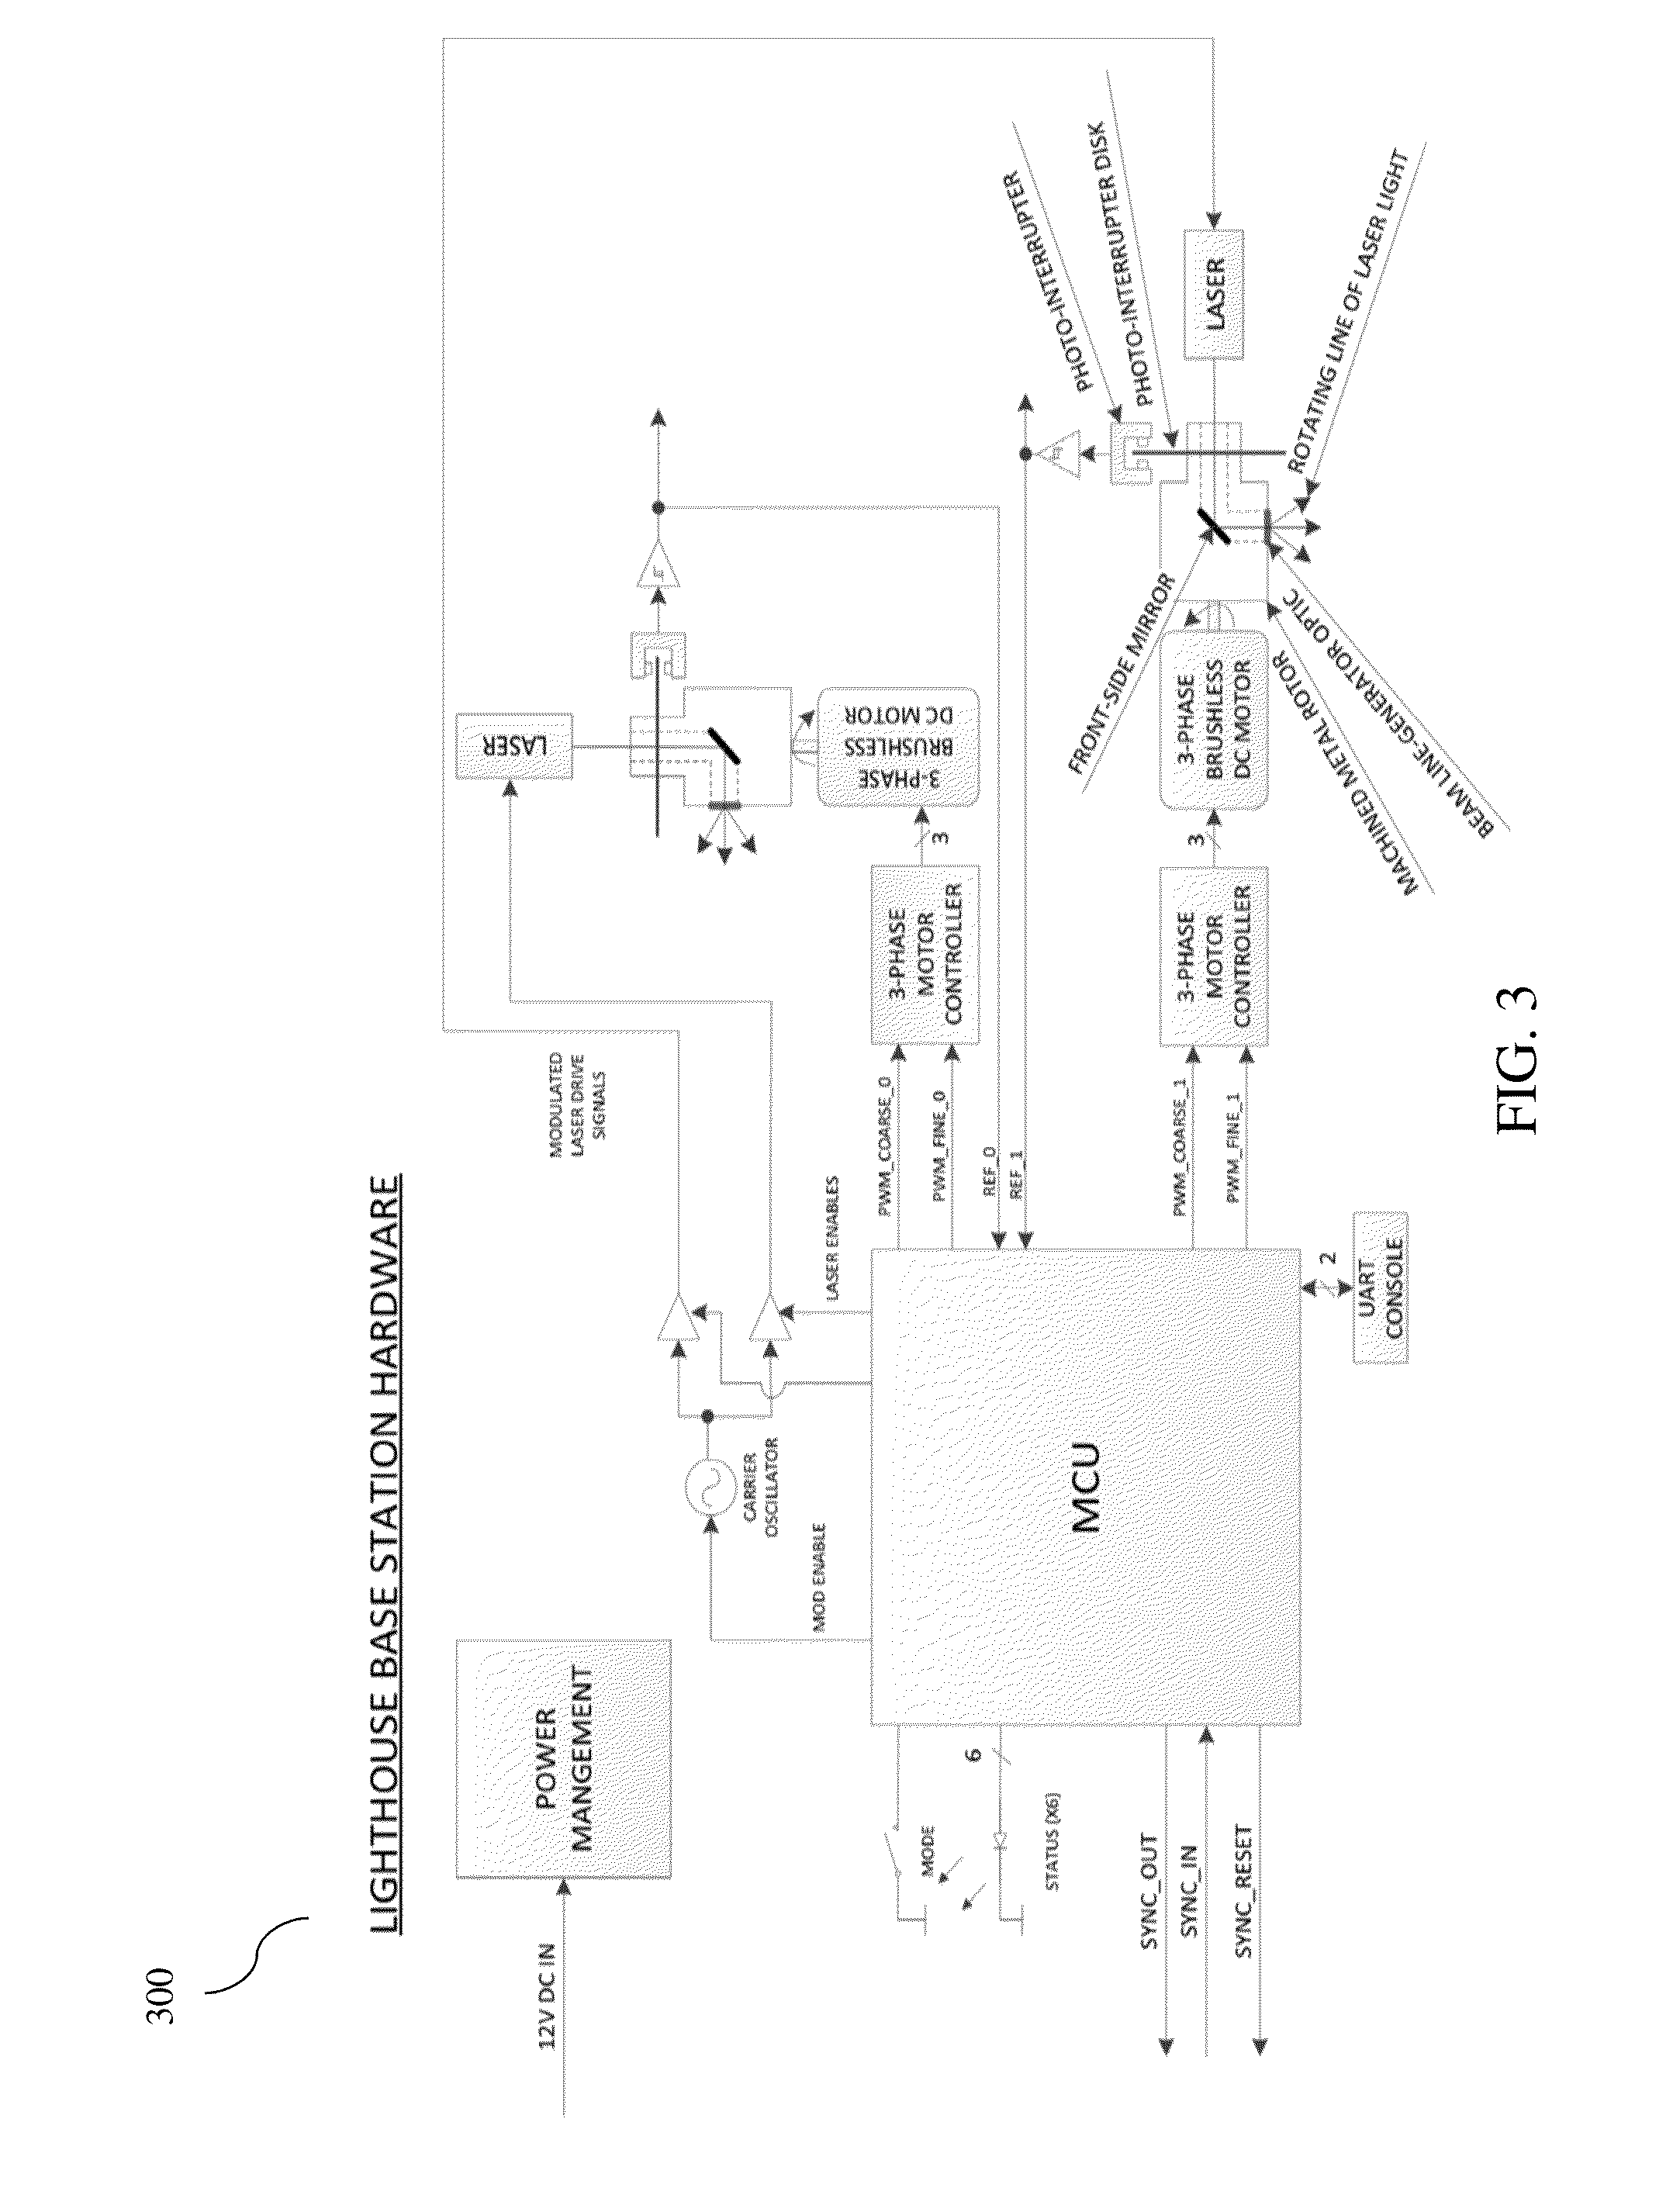 Positional tracking systems and methods